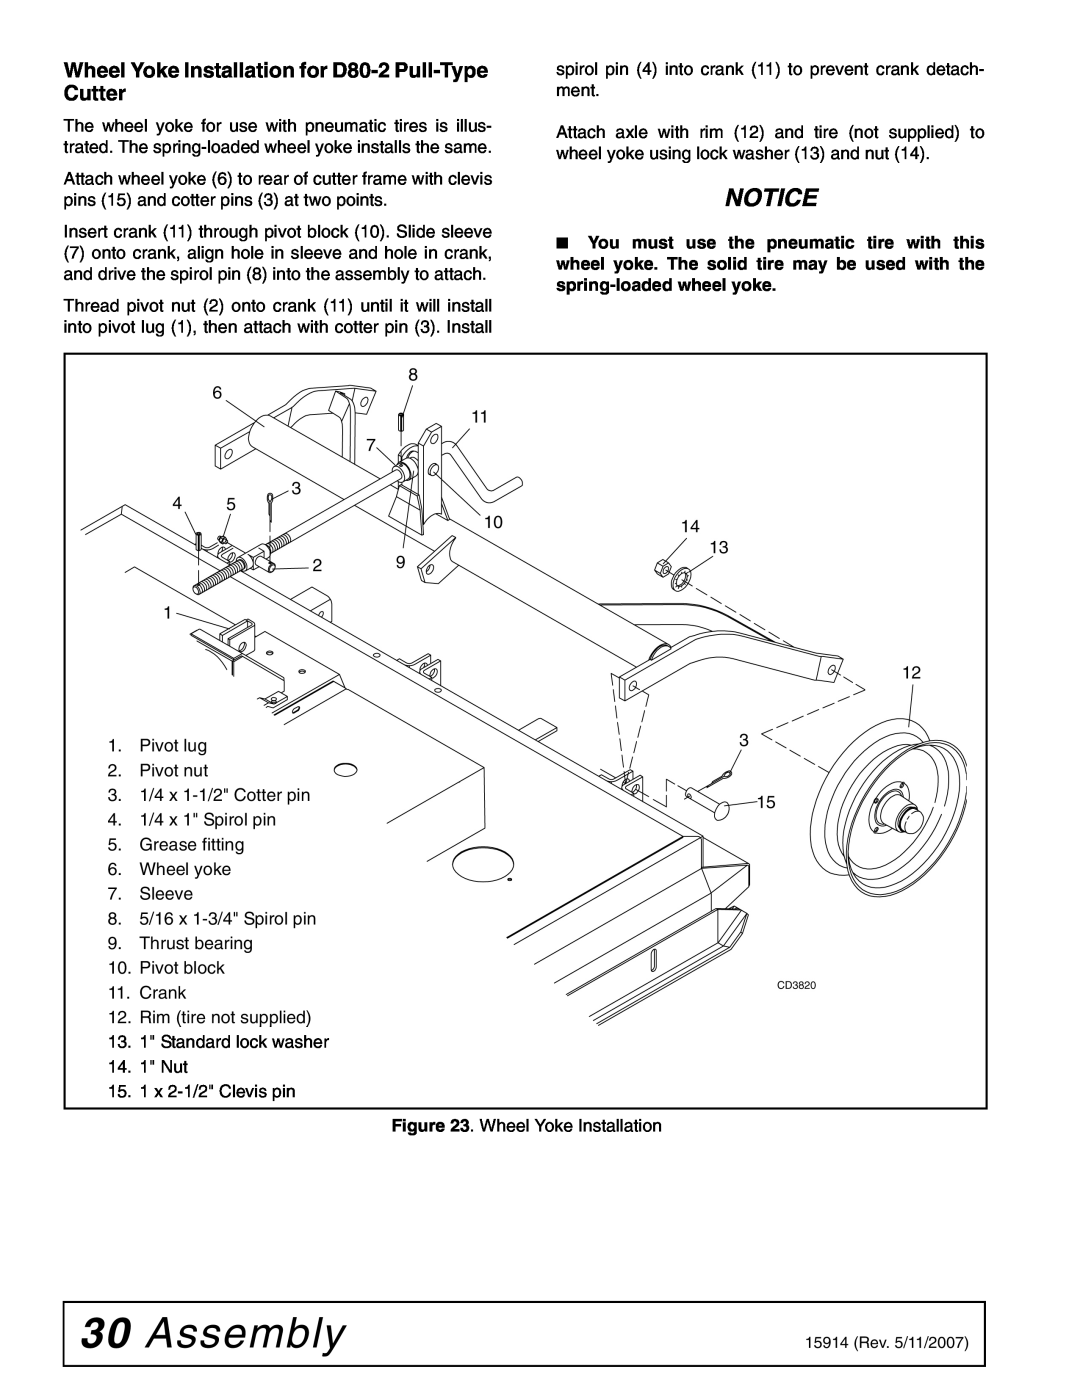 Woods Equipment MD80-2 manual Assembly, Wheel Yoke Installation for D80-2 Pull-TypeCutter 